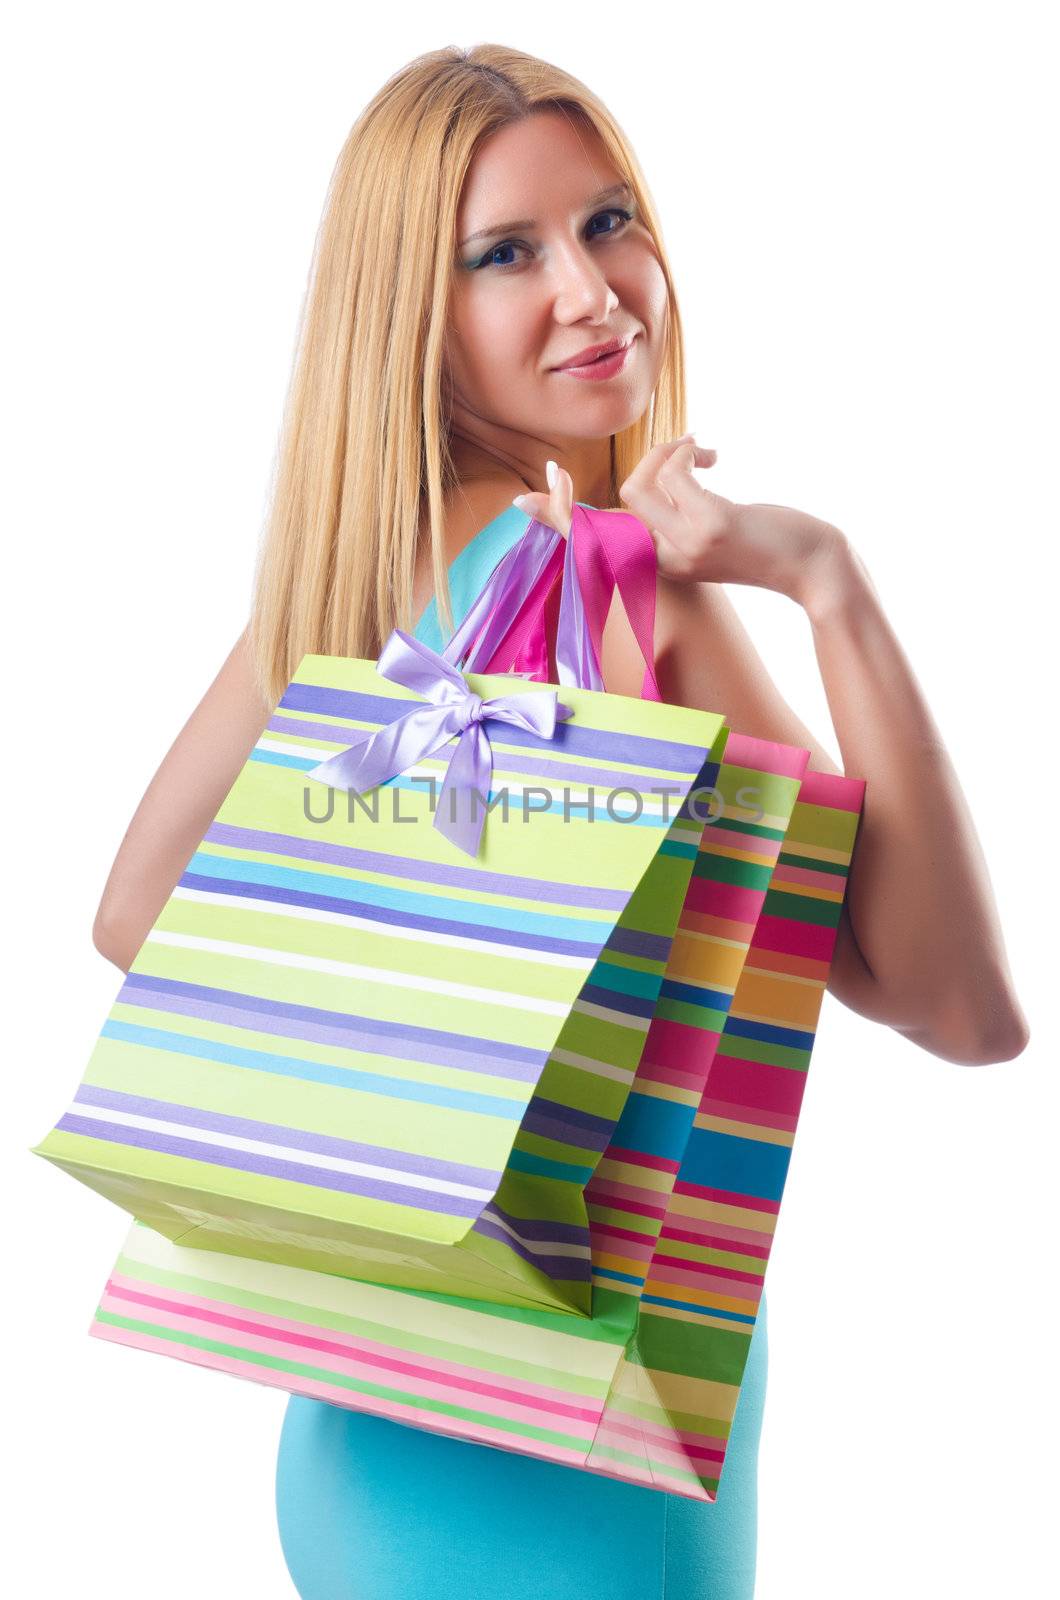 Attractive woman after happy shopping by Elnur